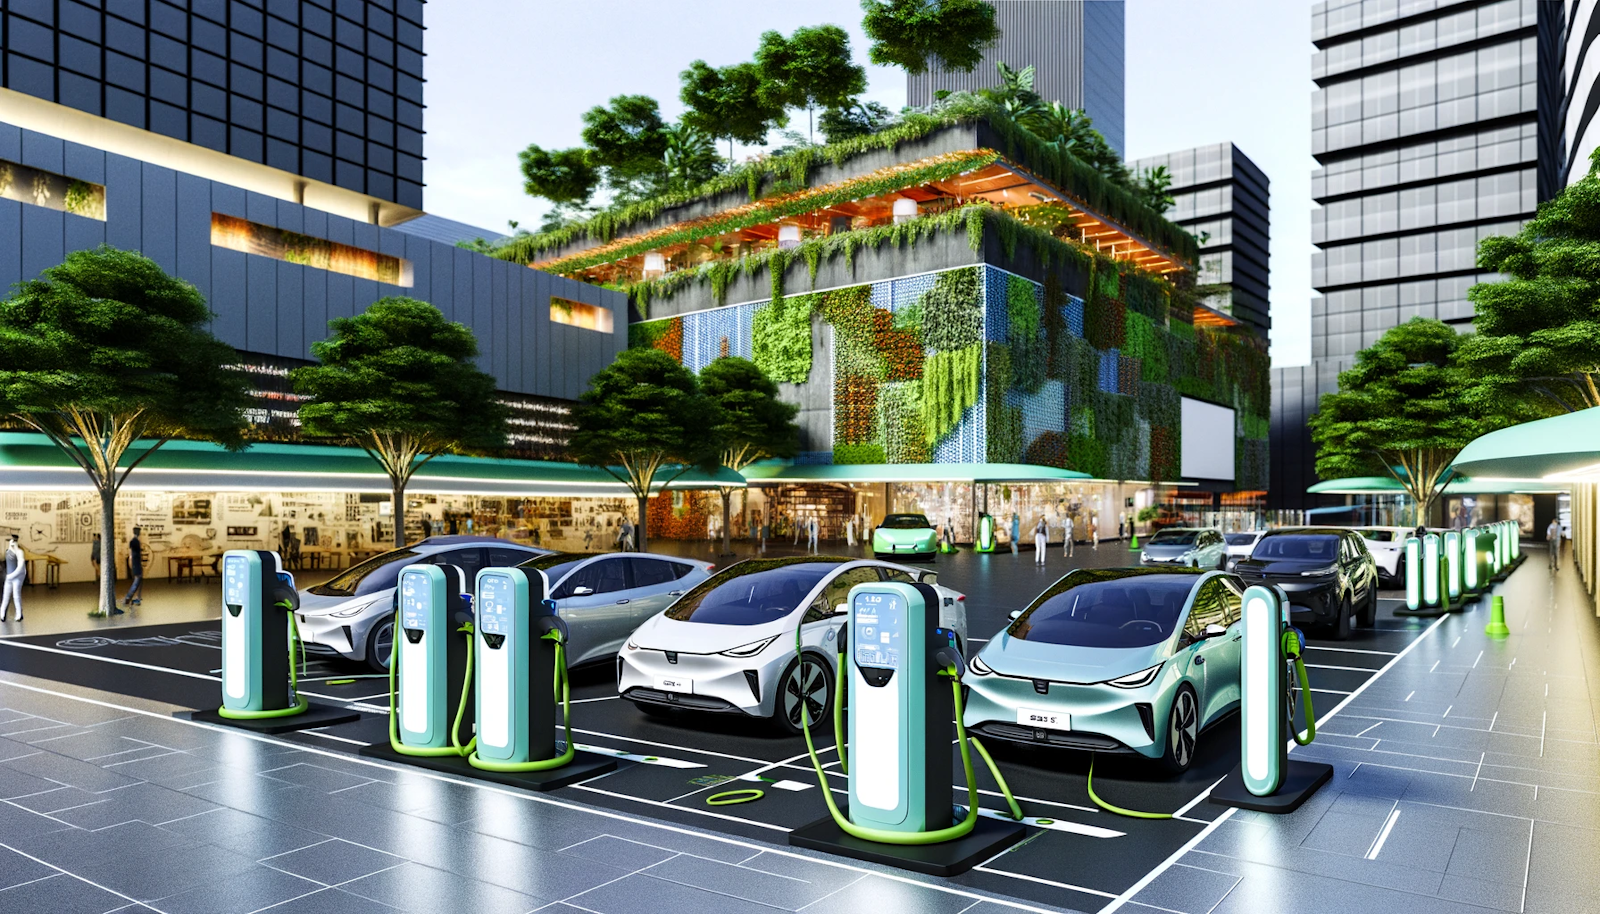 Electric vehicle charging station in a bustling city square, surrounded by modern architecture and greenery, with cars and vans connected to high-tech charging pillars, illustrating an urban blend of technology and sustainability.